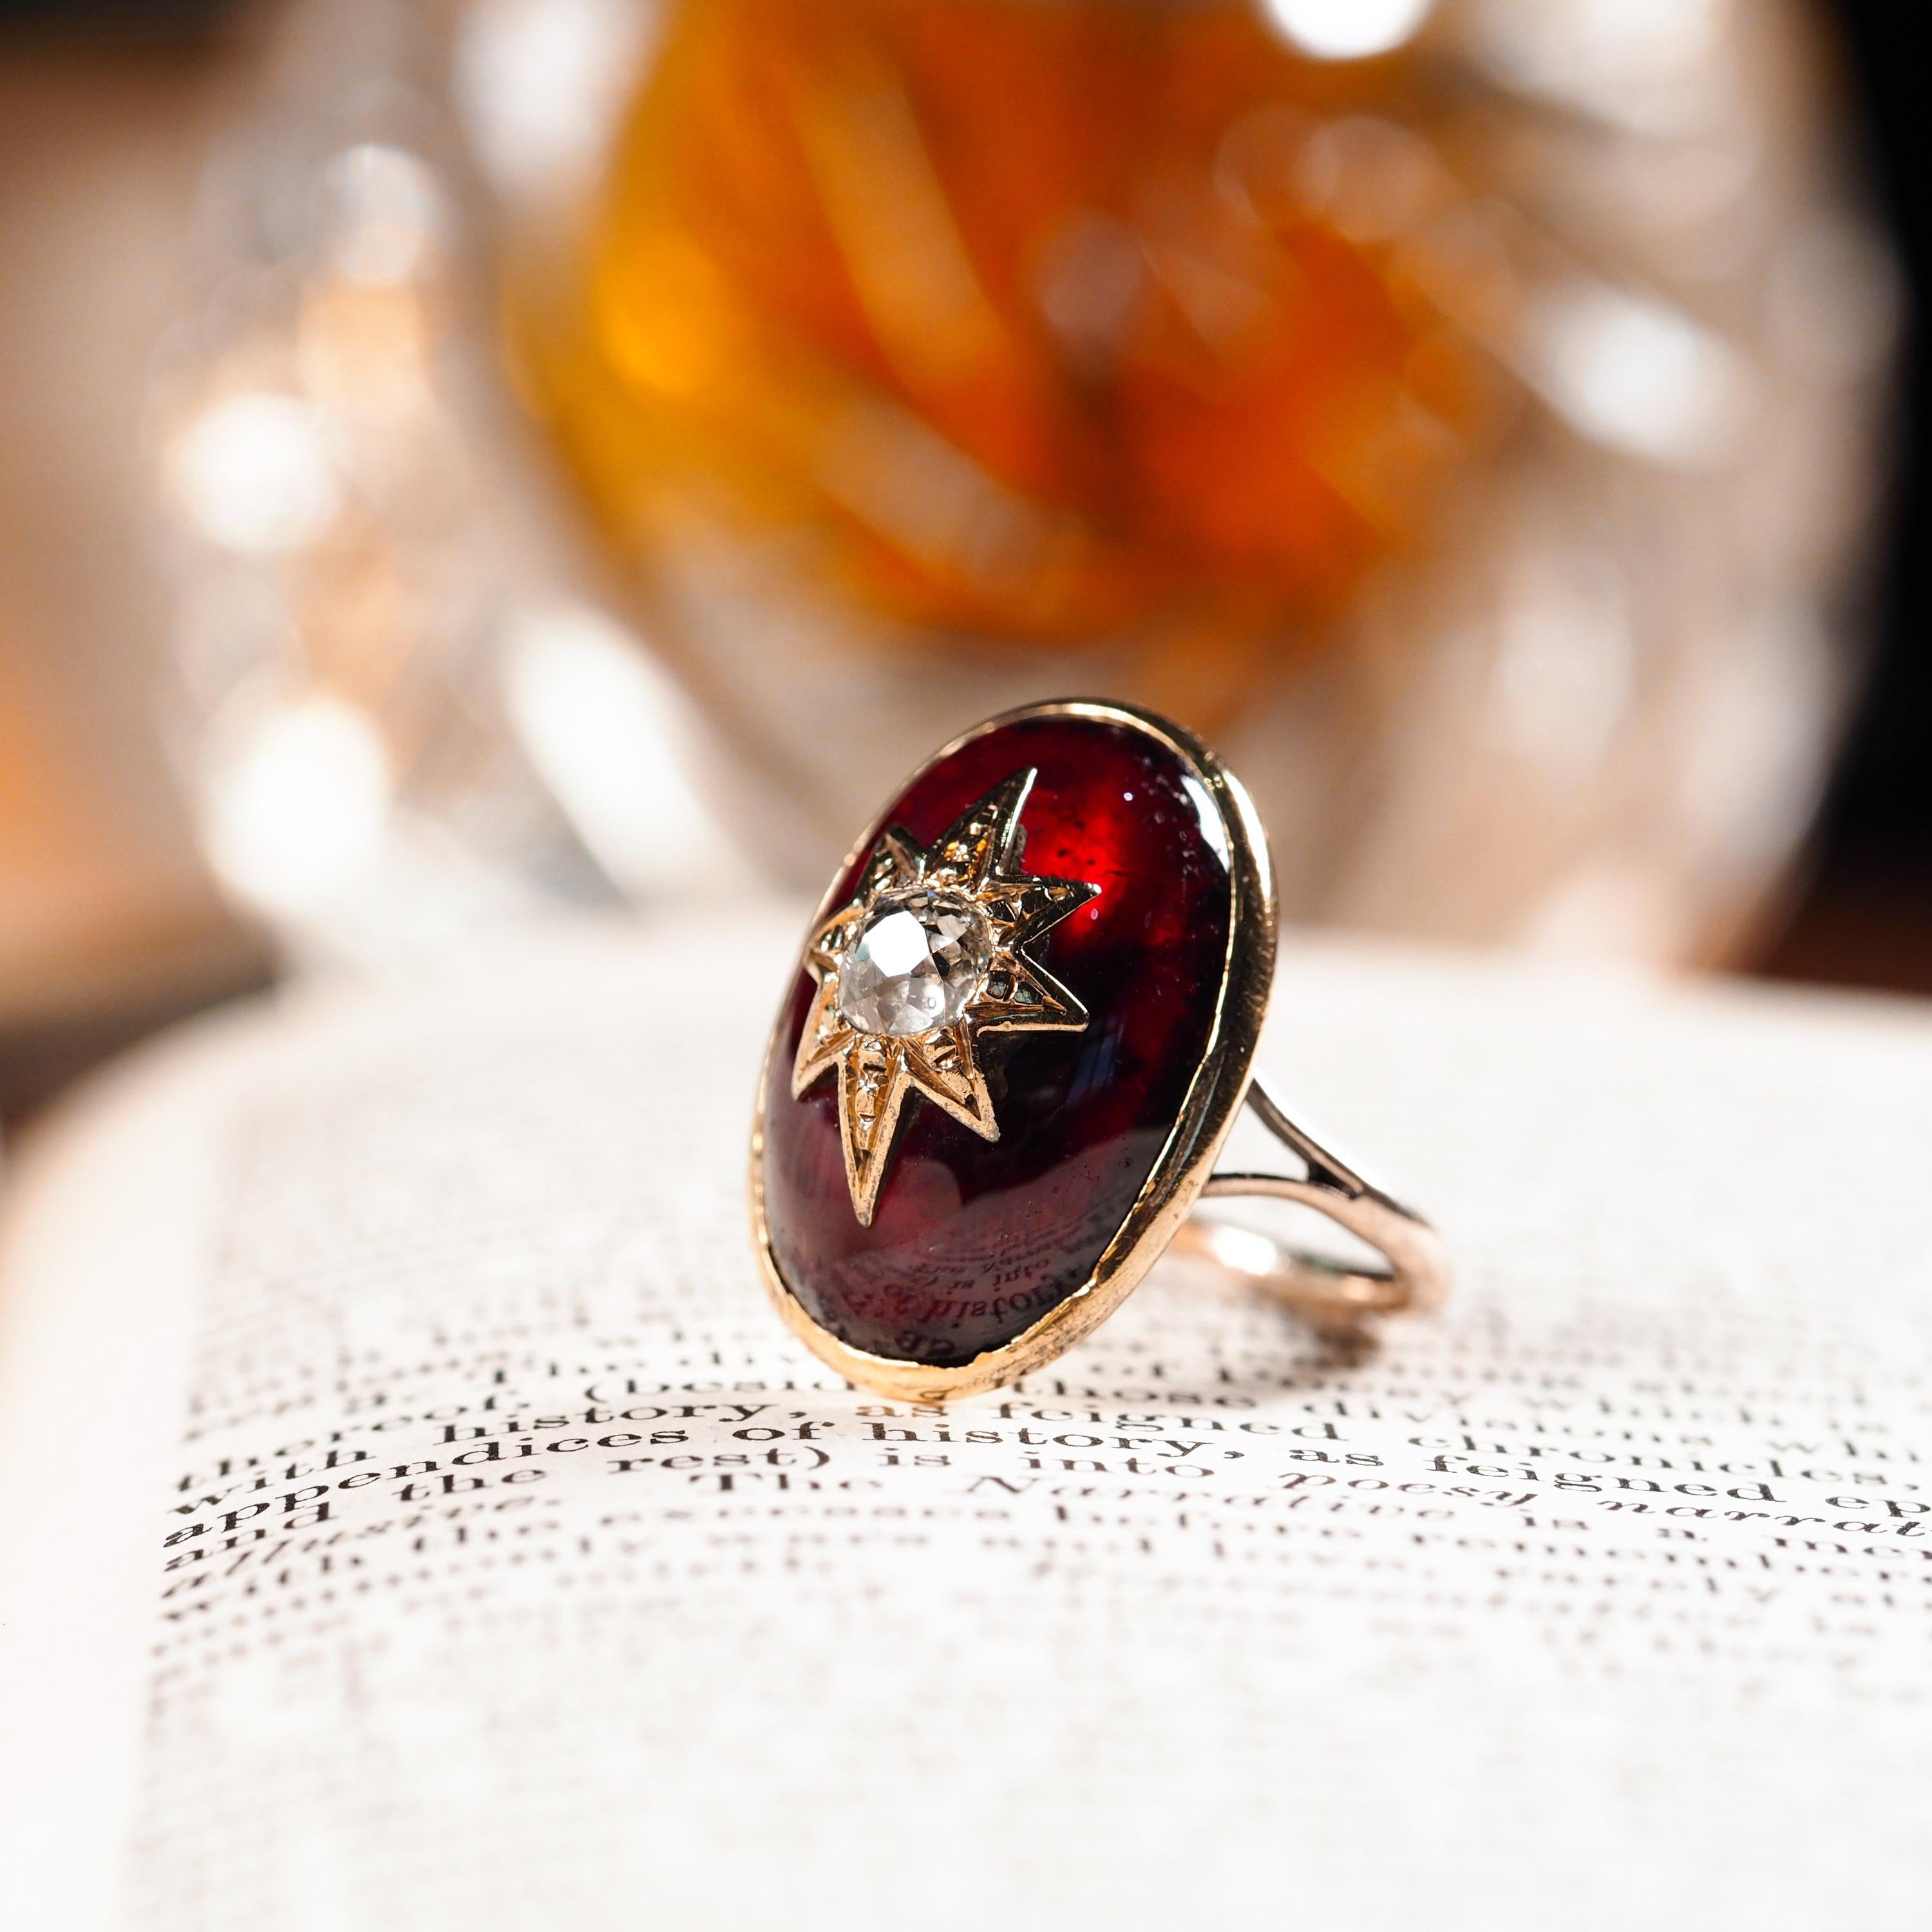 We are delighted to offer this large and majestic 18ct gold garnet ring made in the early Victorian period c.1840.
 
Distinctly antique and exquisitely designed, this ring features a large garnet cabochon set in 18ct gold with a central diamond set